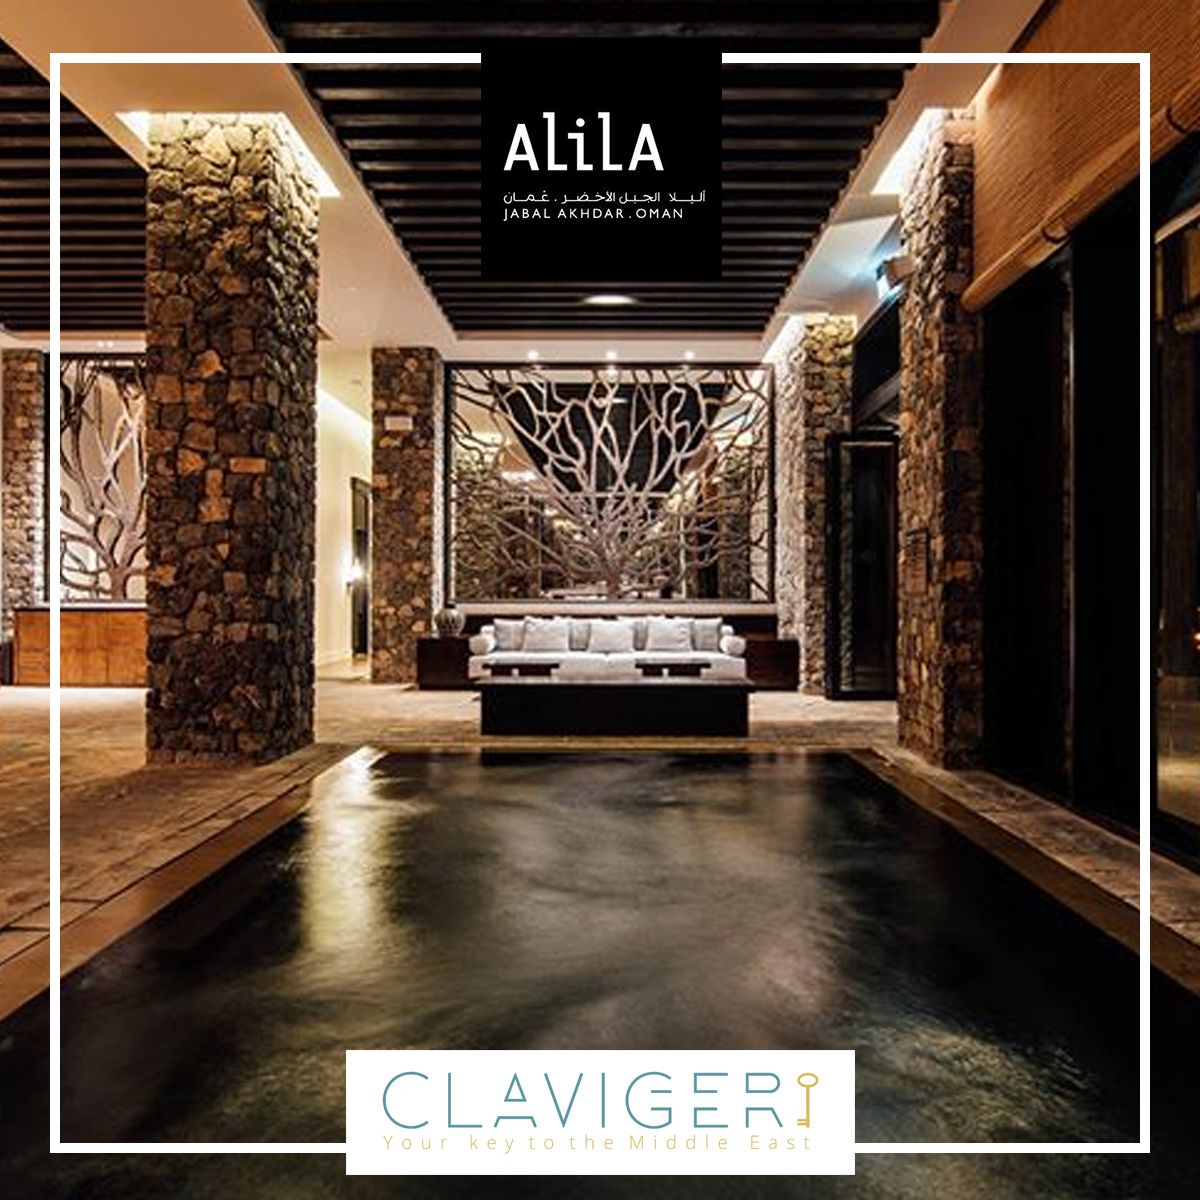 No better place to relax and refresh after a day filled with adventure at Alila Jabal Akhdar, Oman than our indoor heated pool.
@AlilaJabal 
 #claviger #middleeast #clavigerluxurycollection hotel sales representation middle east  #Alilahotels, #AlilaJabalAkhdar